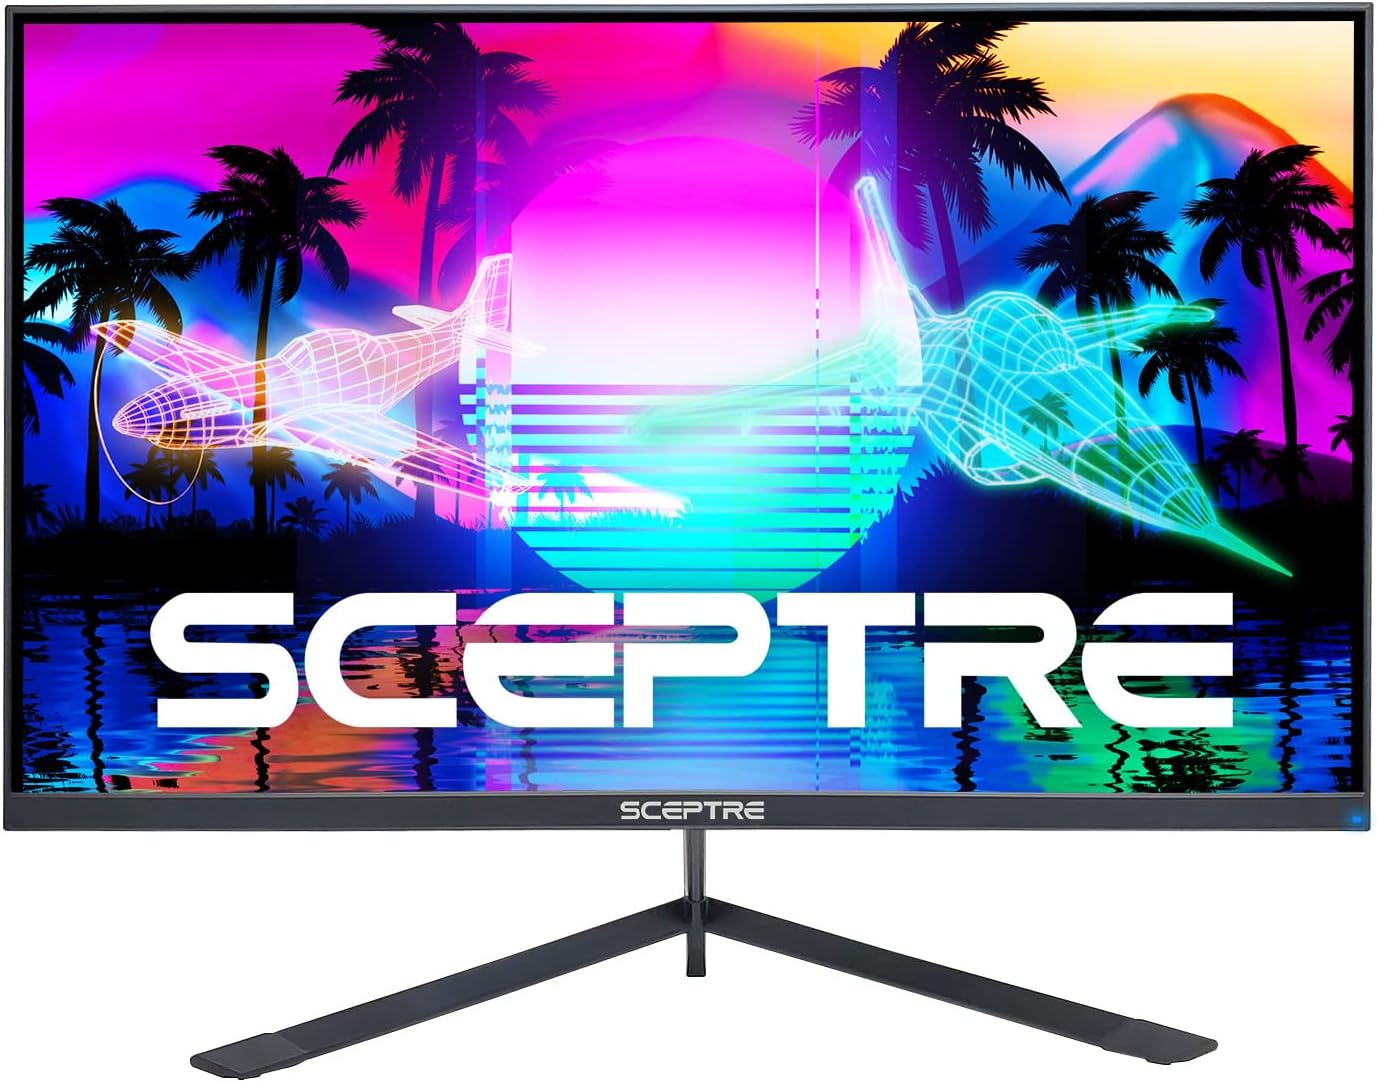 Sceptre 27-inch FHD 1080p IPS LED Gaming Monitor 1ms [...]